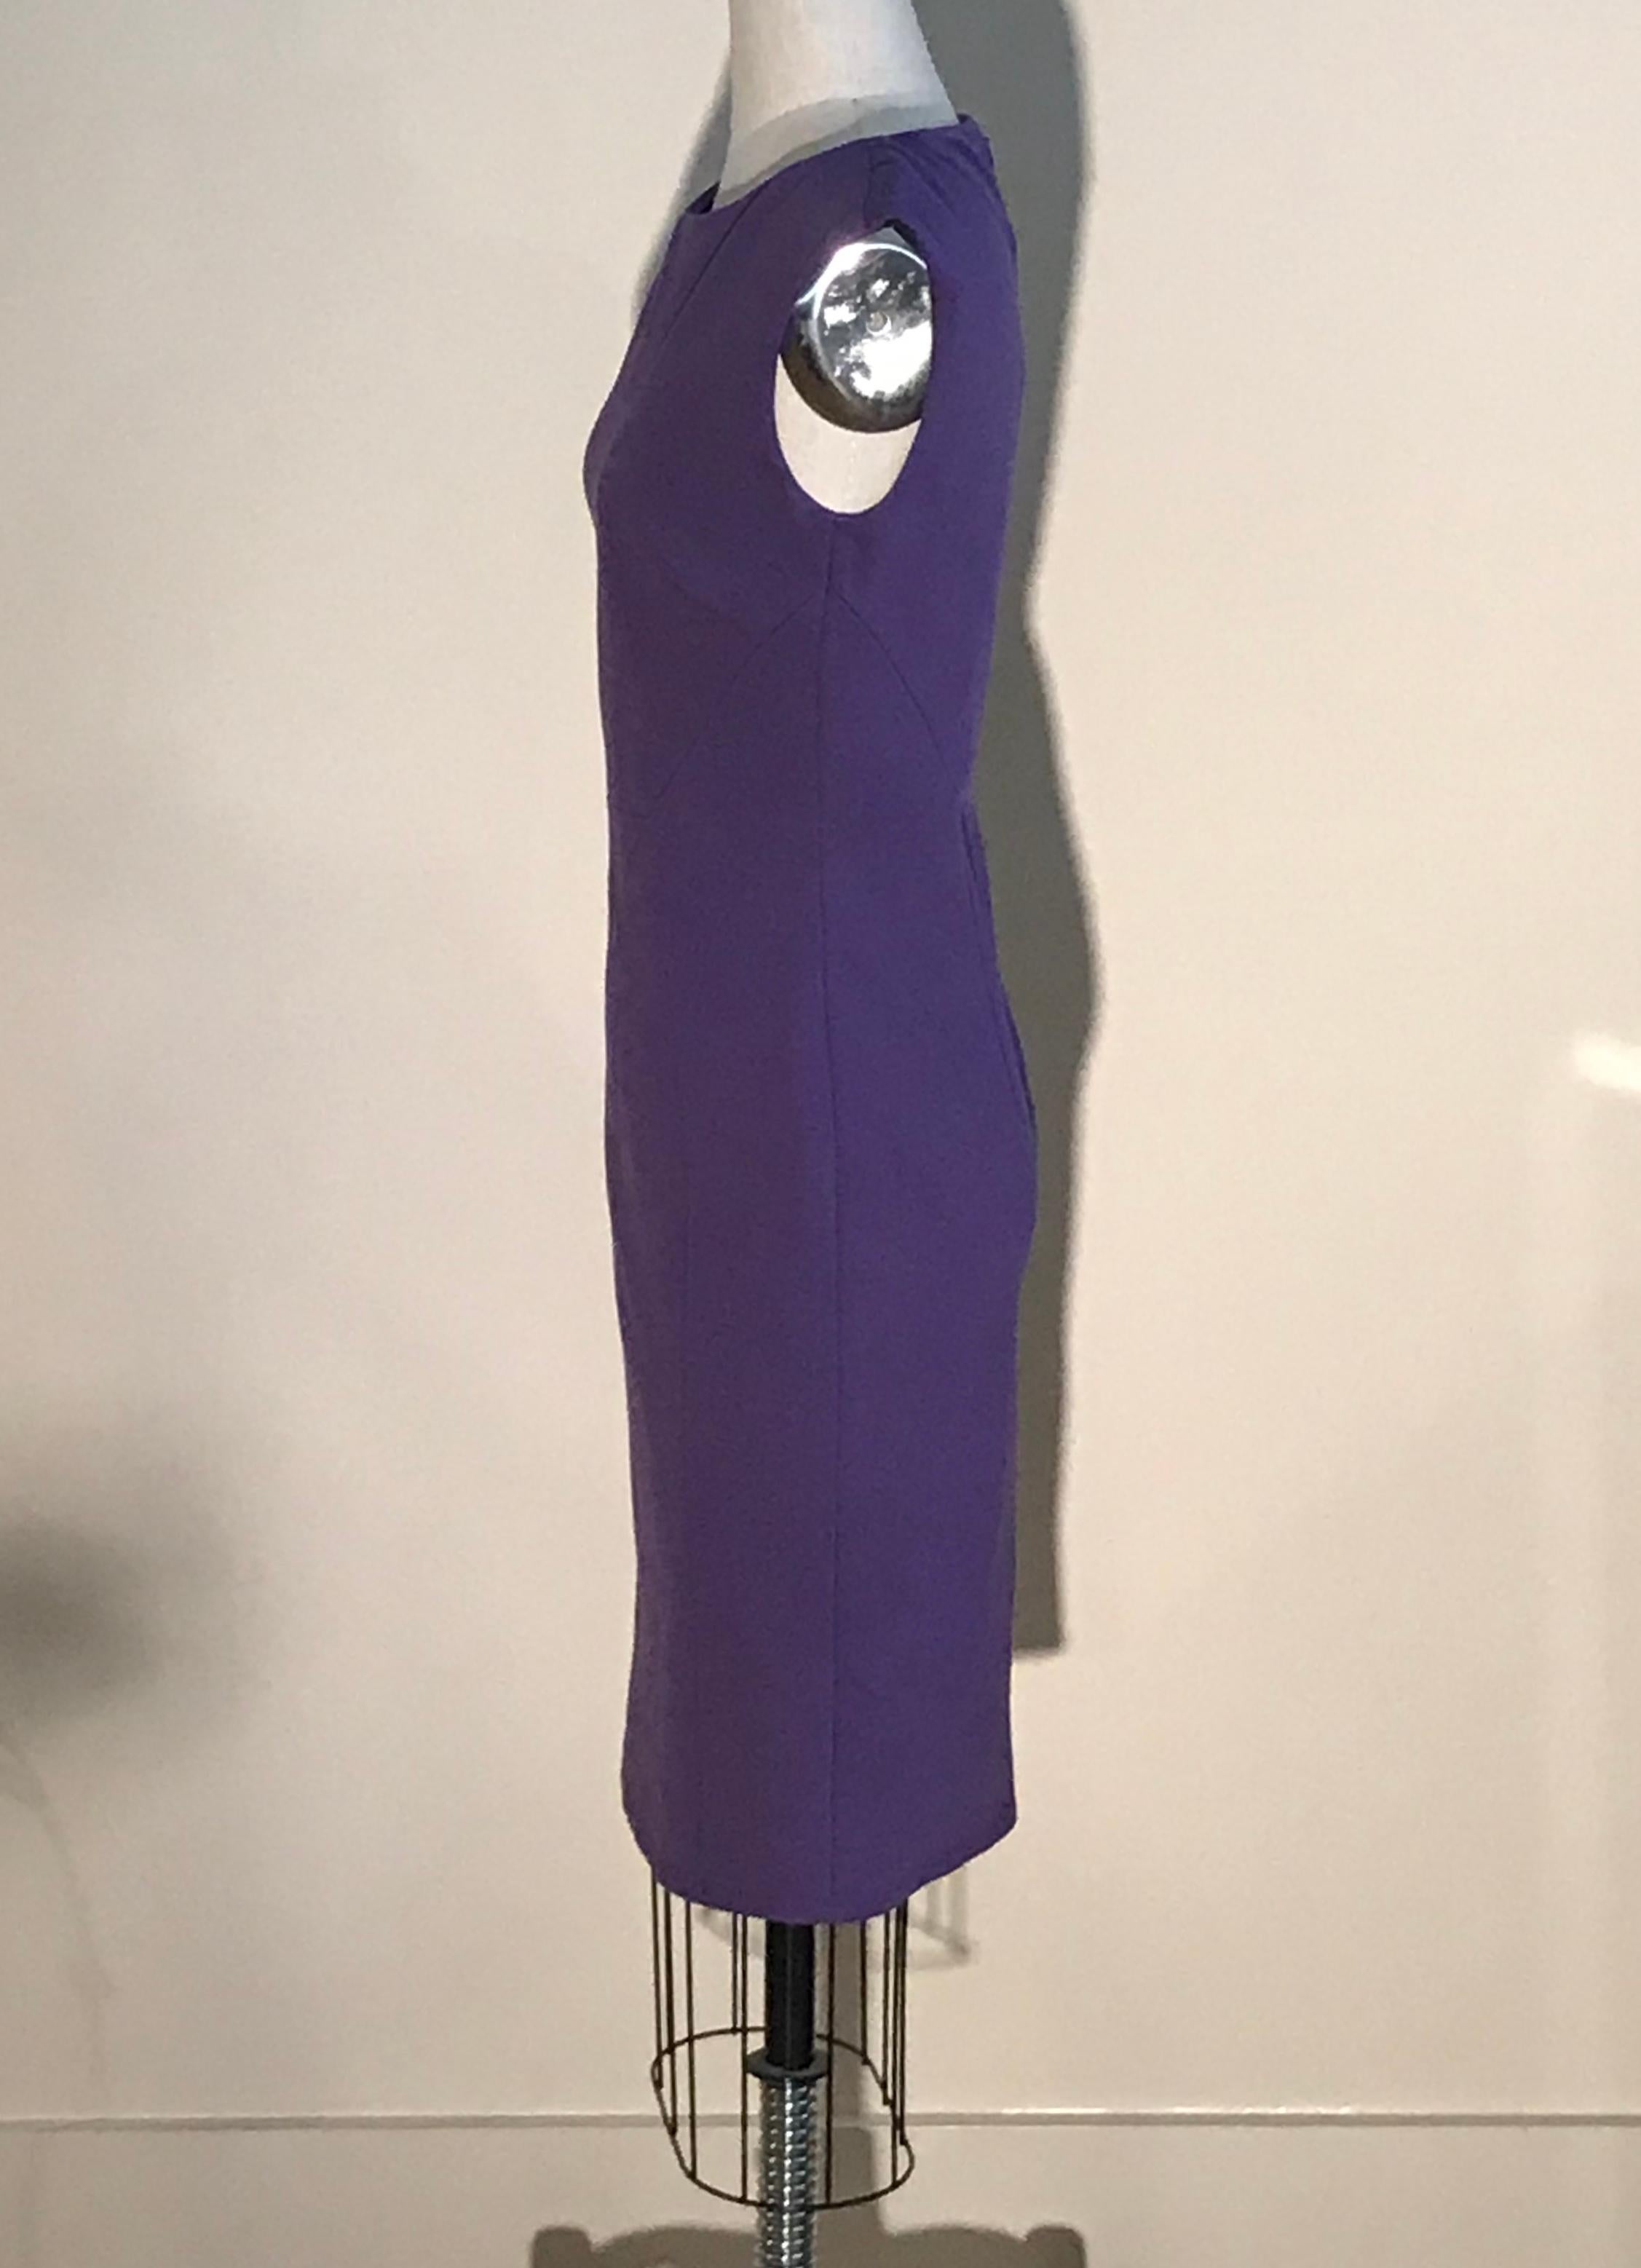 Emilio Pucci Purple stretch knit dress with boat neck and H shaped panel detail at front. Back zip and hook and eye. Branded 'Pucci' at zipper.

Please note that color is somewhat lighter/less blue than photos appear- we had a hard time capturing